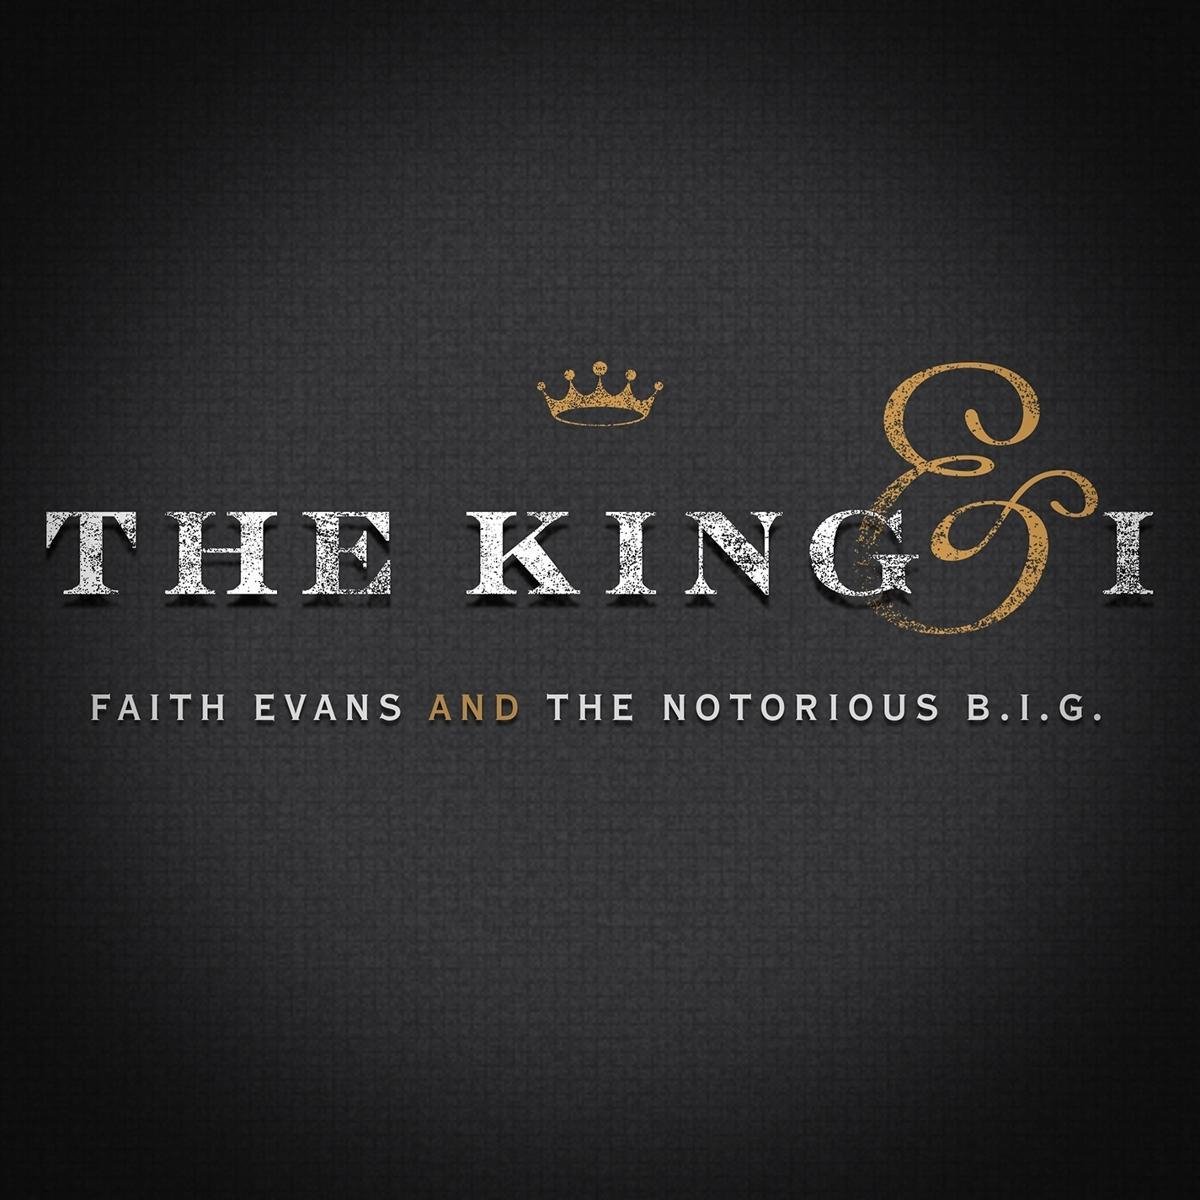 The King & I (LP)